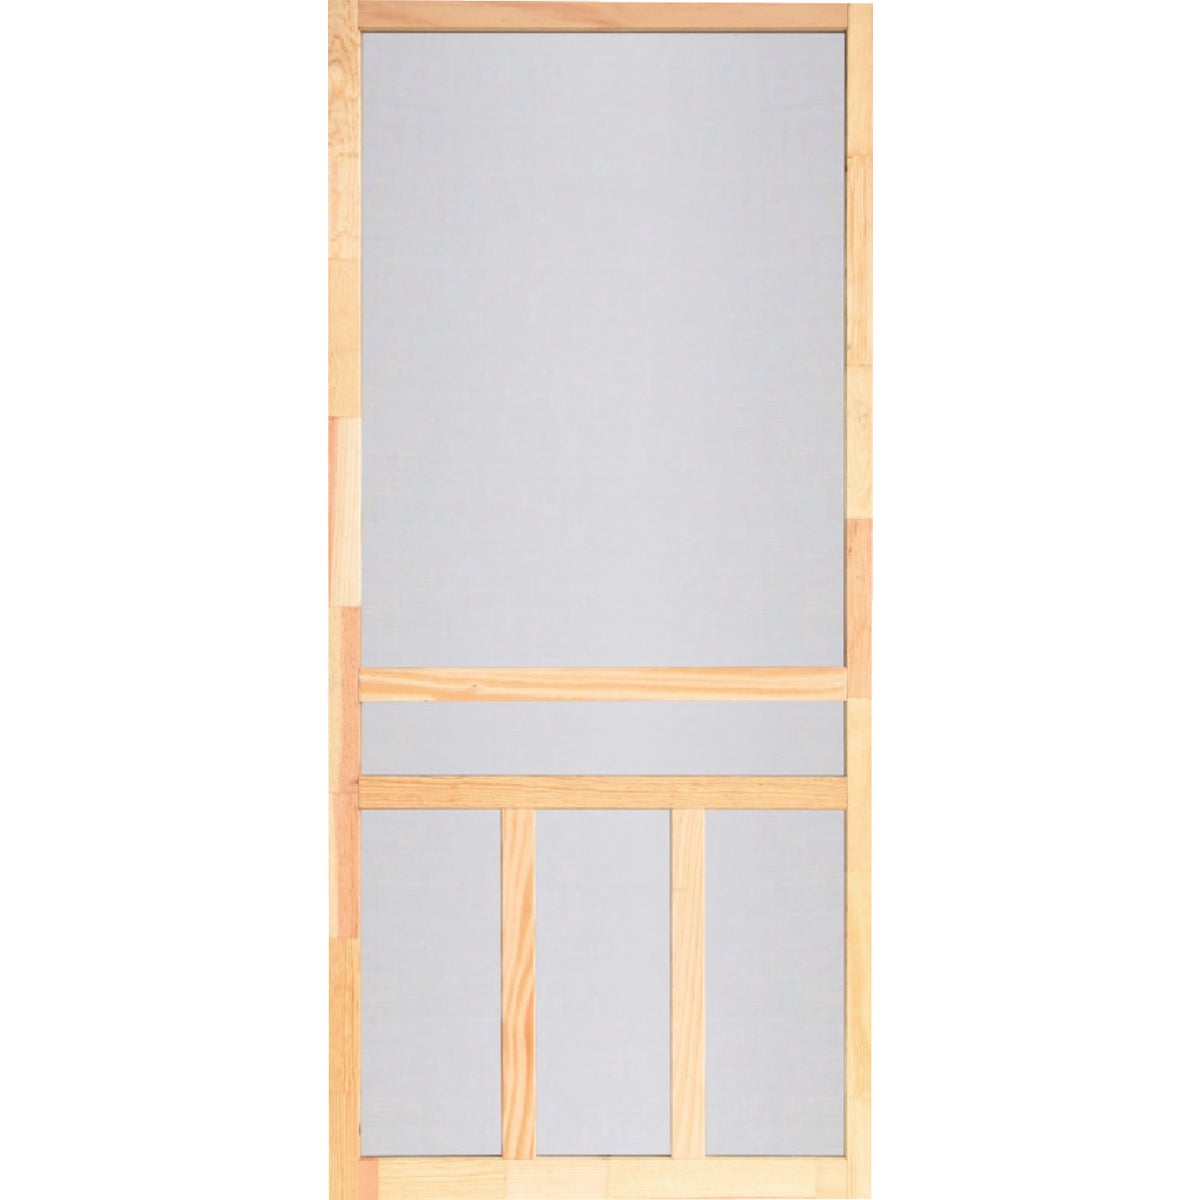 Screen Tight Creekside 36 In. W x 80 In. H x 1 In. Thick Natural Fingerjoint Wood T-Bar Screen Door